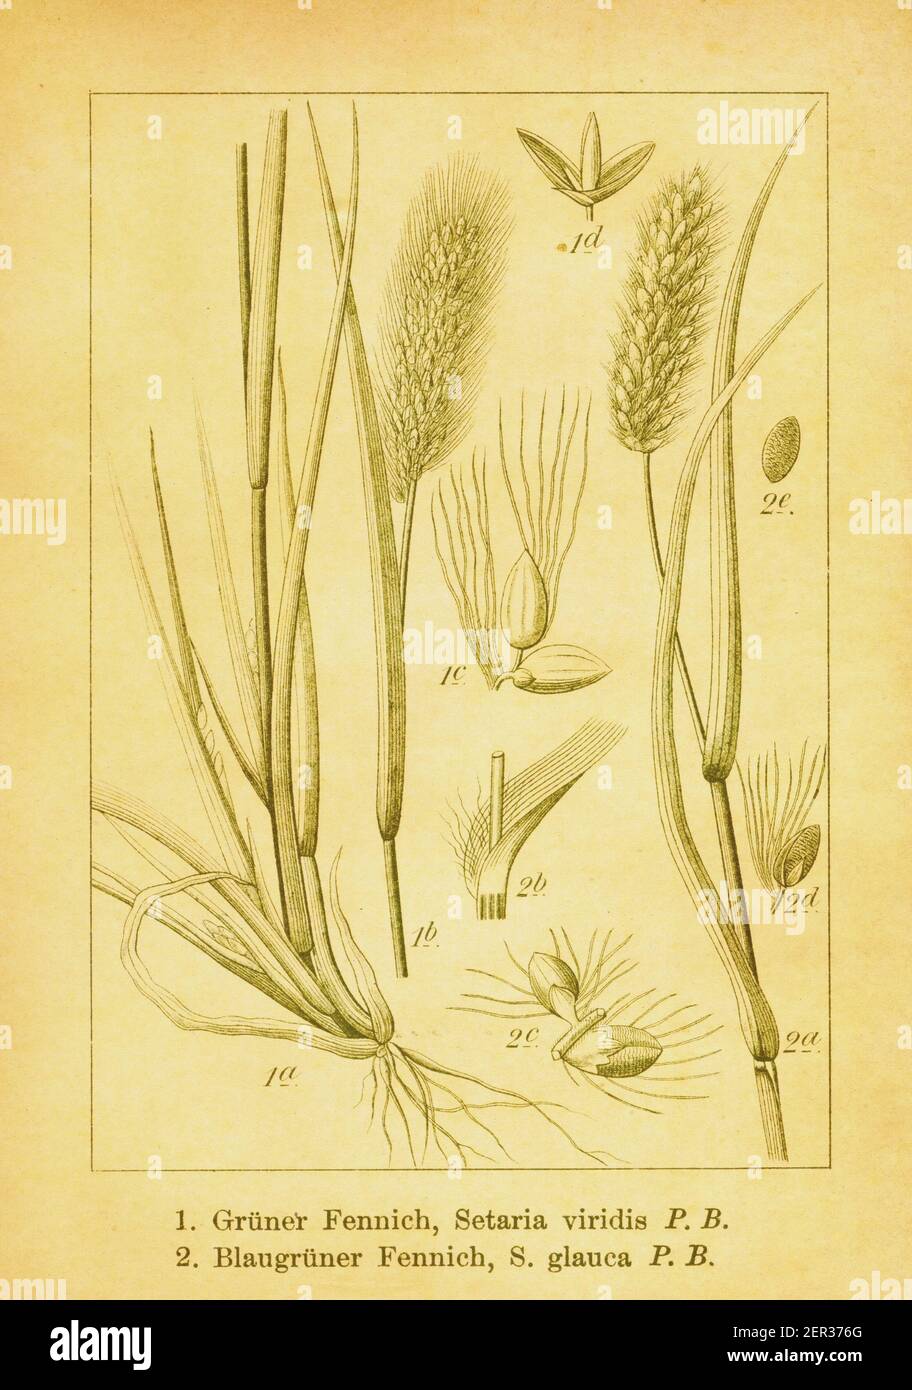 Antique 19th-century engraving of green bristlegrass and yellow foxtail. Illustration by Jacob Sturm (1771-1848) from the book Deutschlands Flora in A Stock Photo